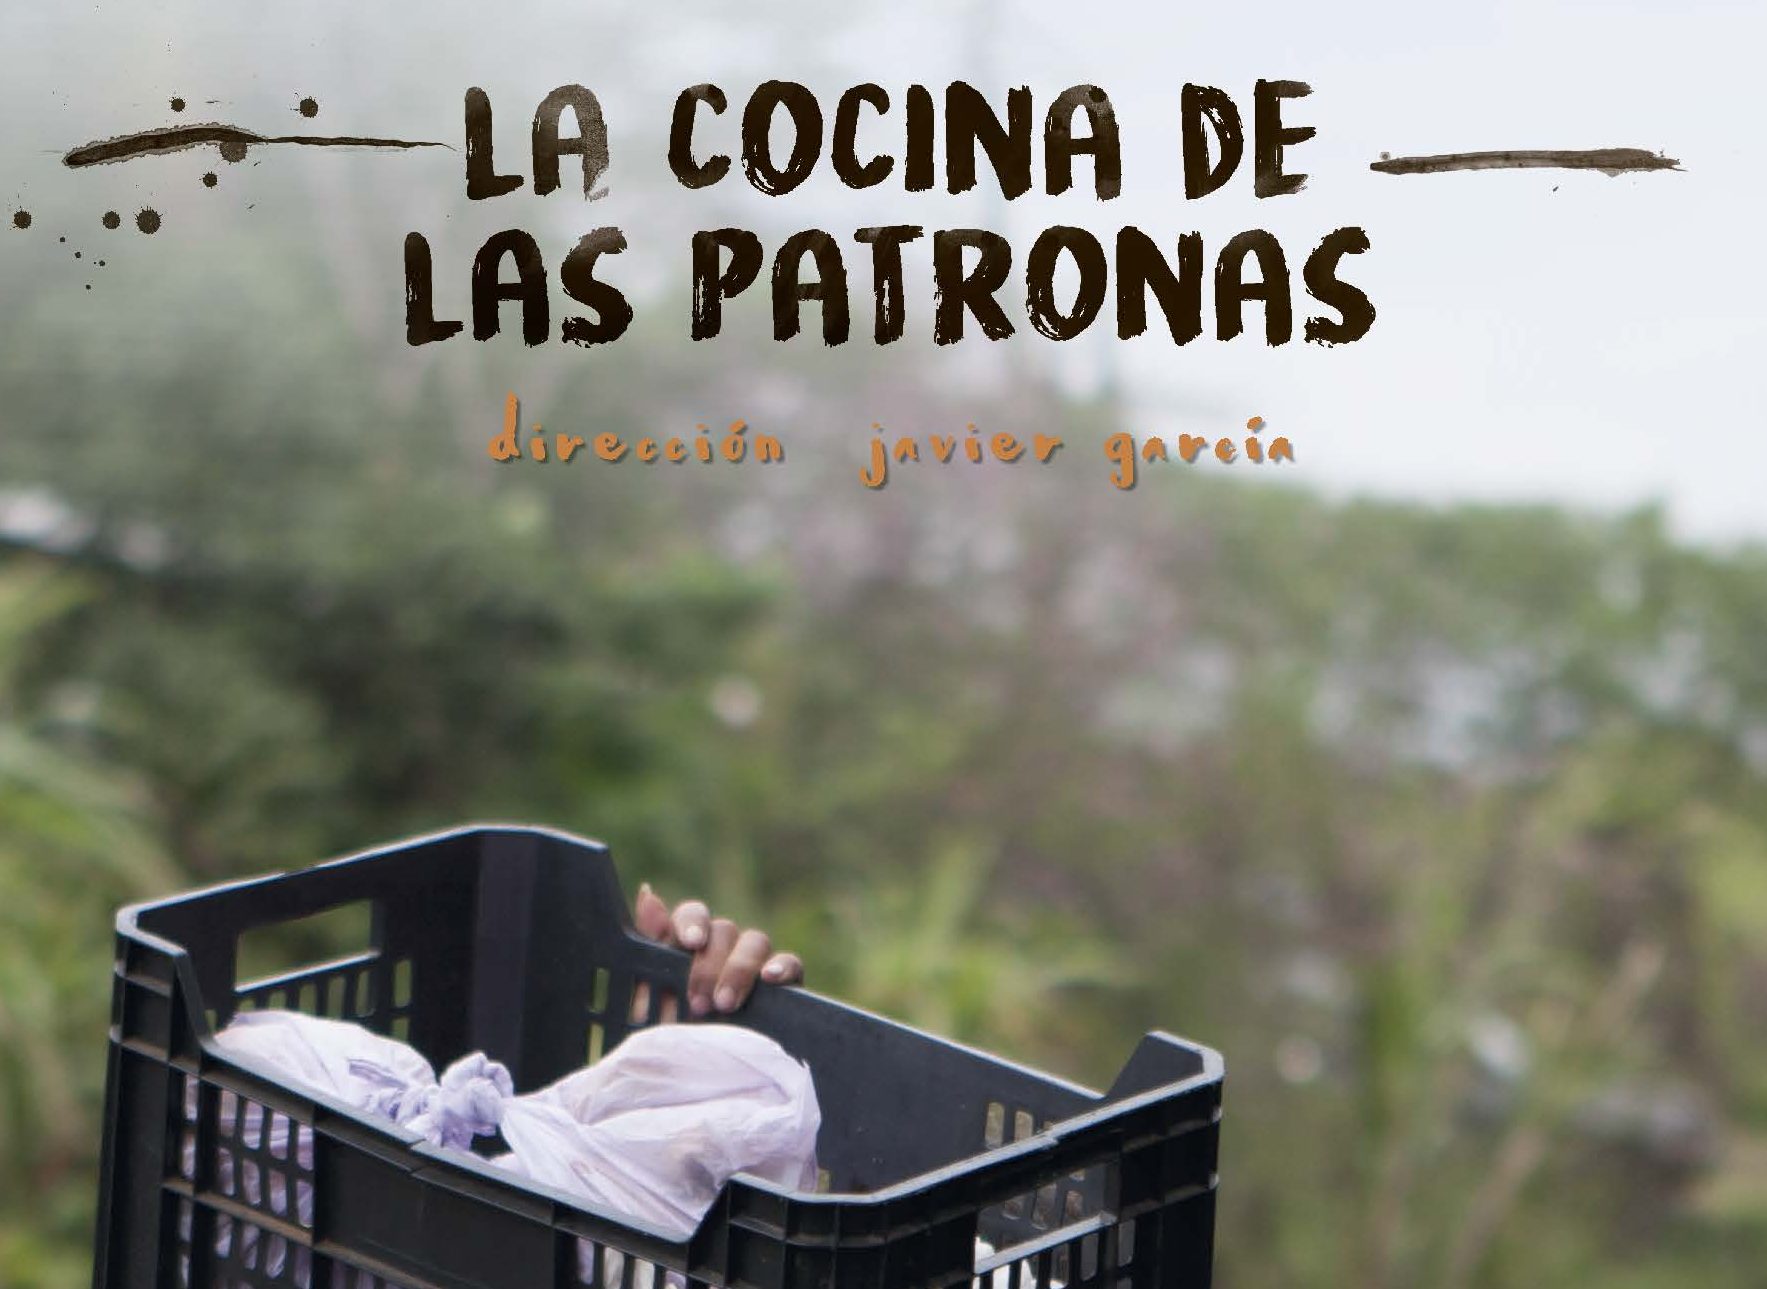 04/27:  “Las Patronas’ Kitchen”: Film screening and discussion 